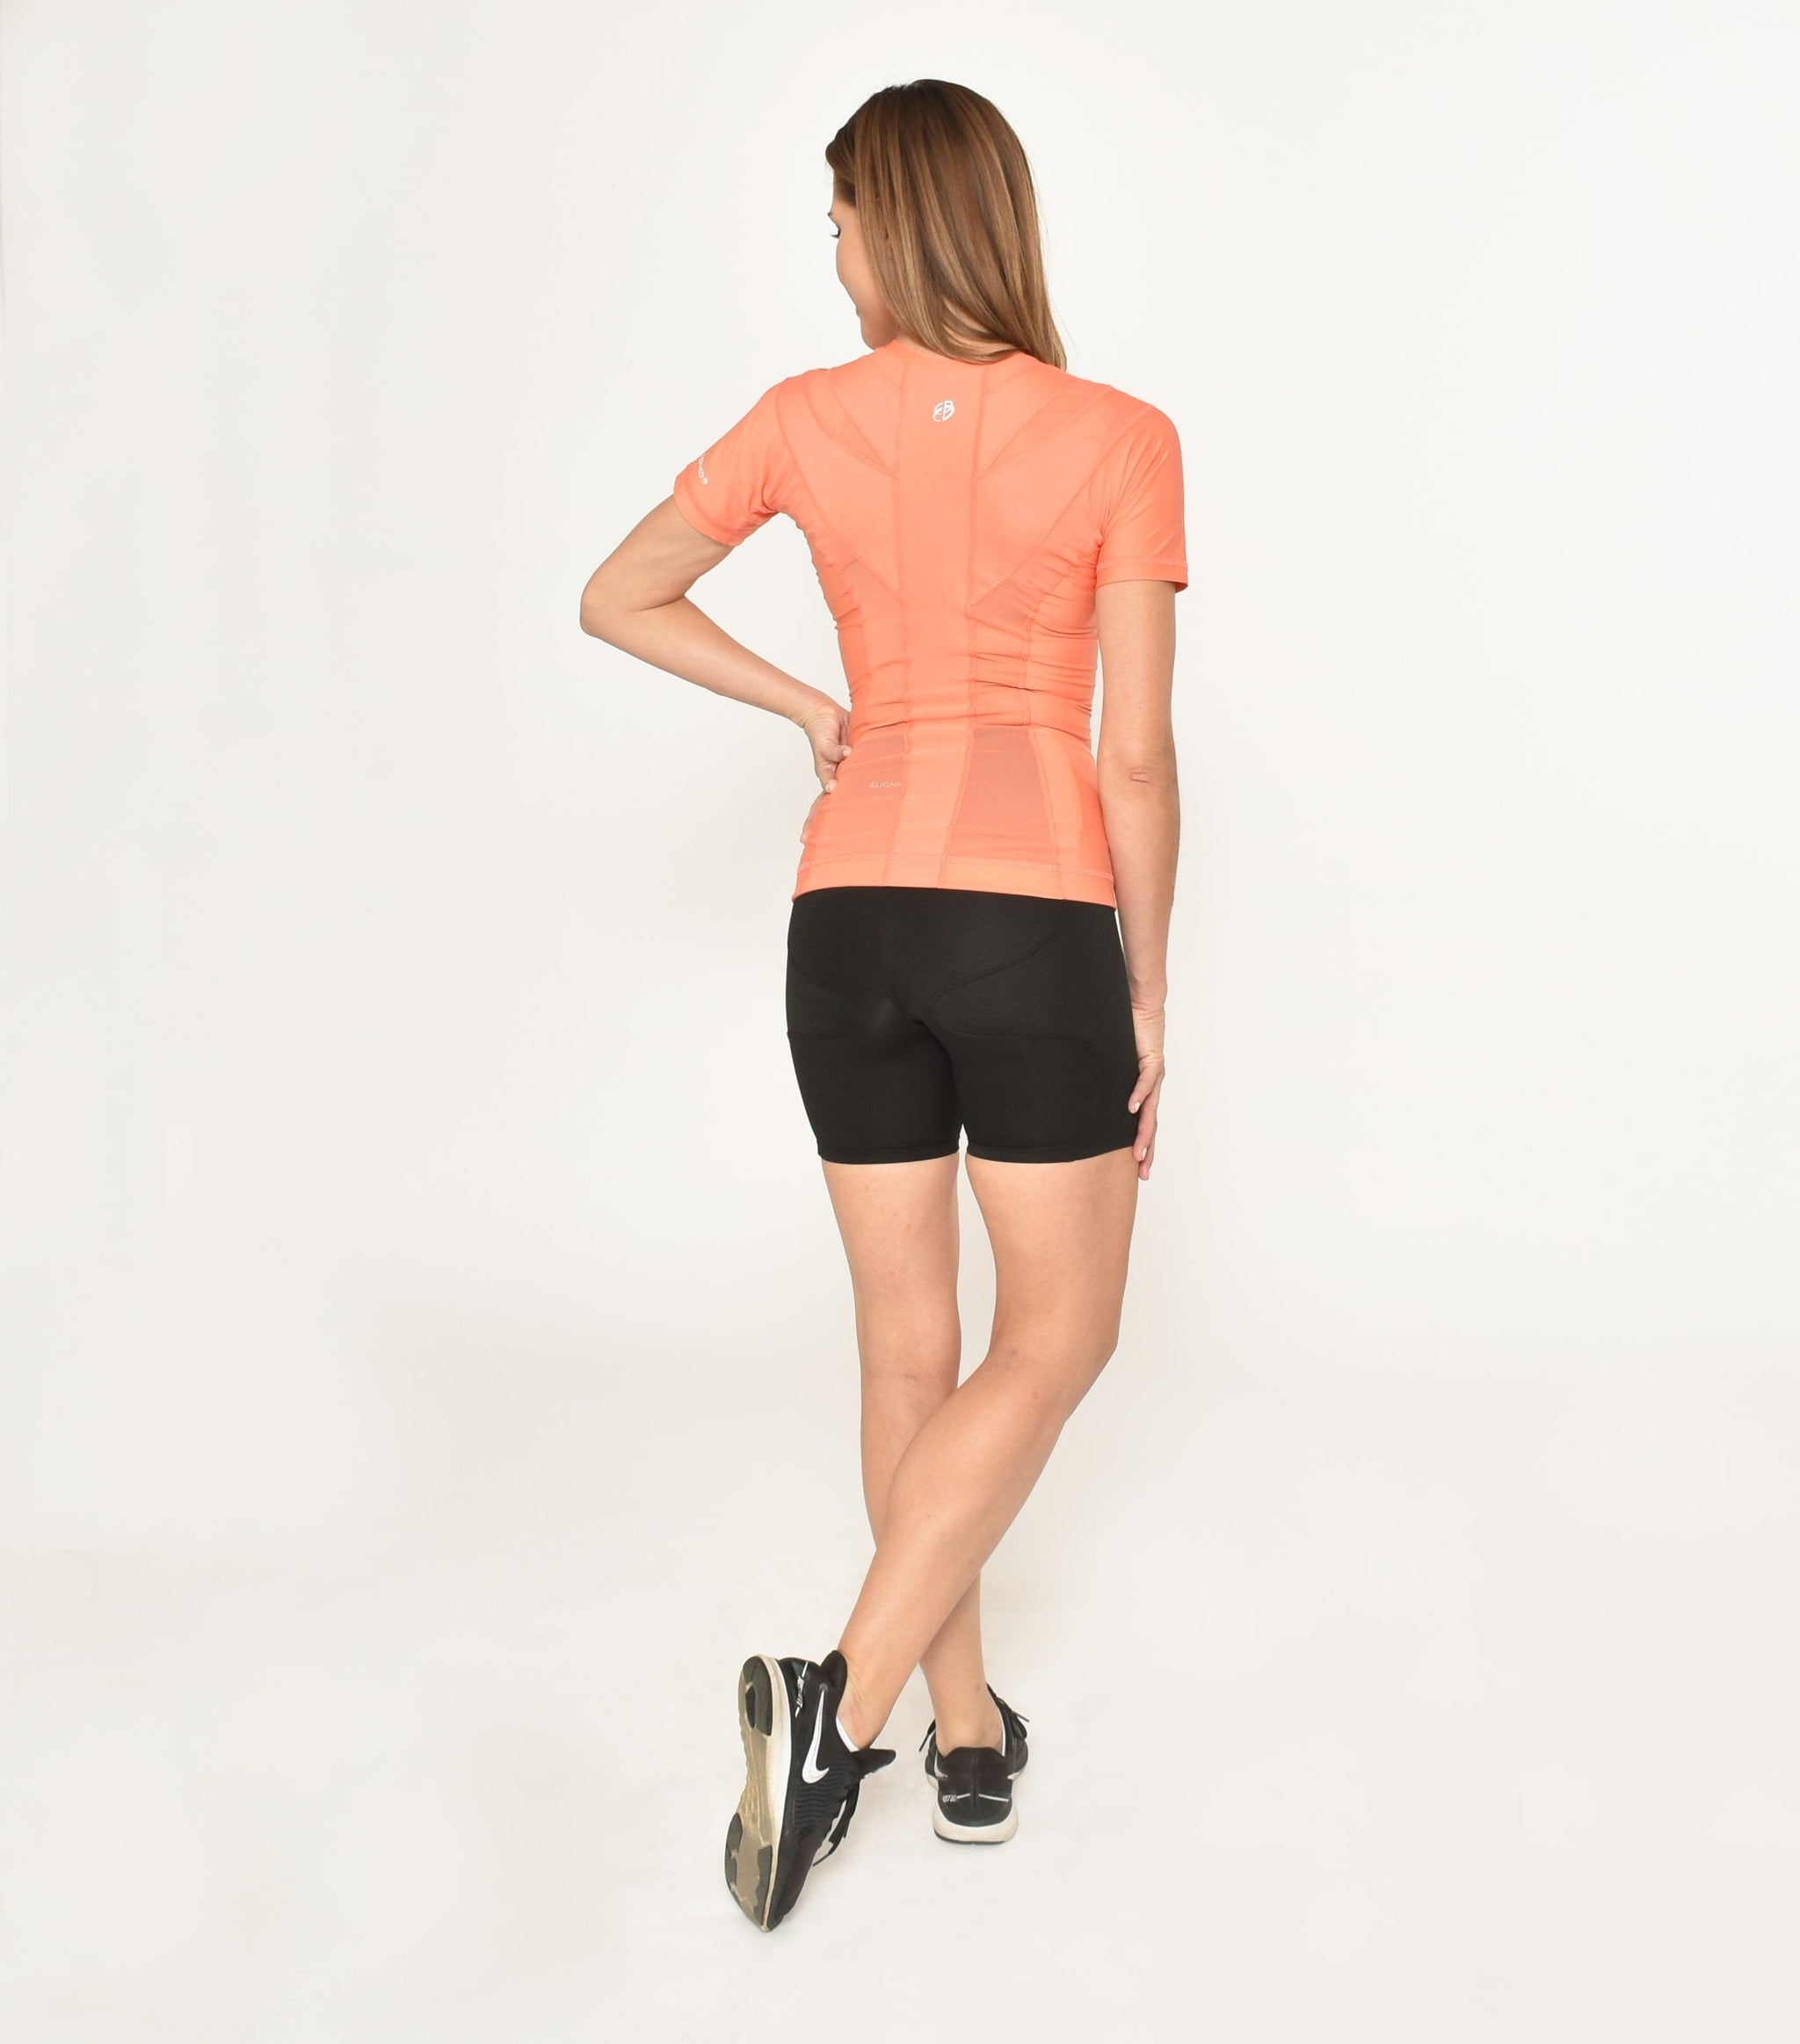 ActivAided Posture Shirts Train Away Back Pain